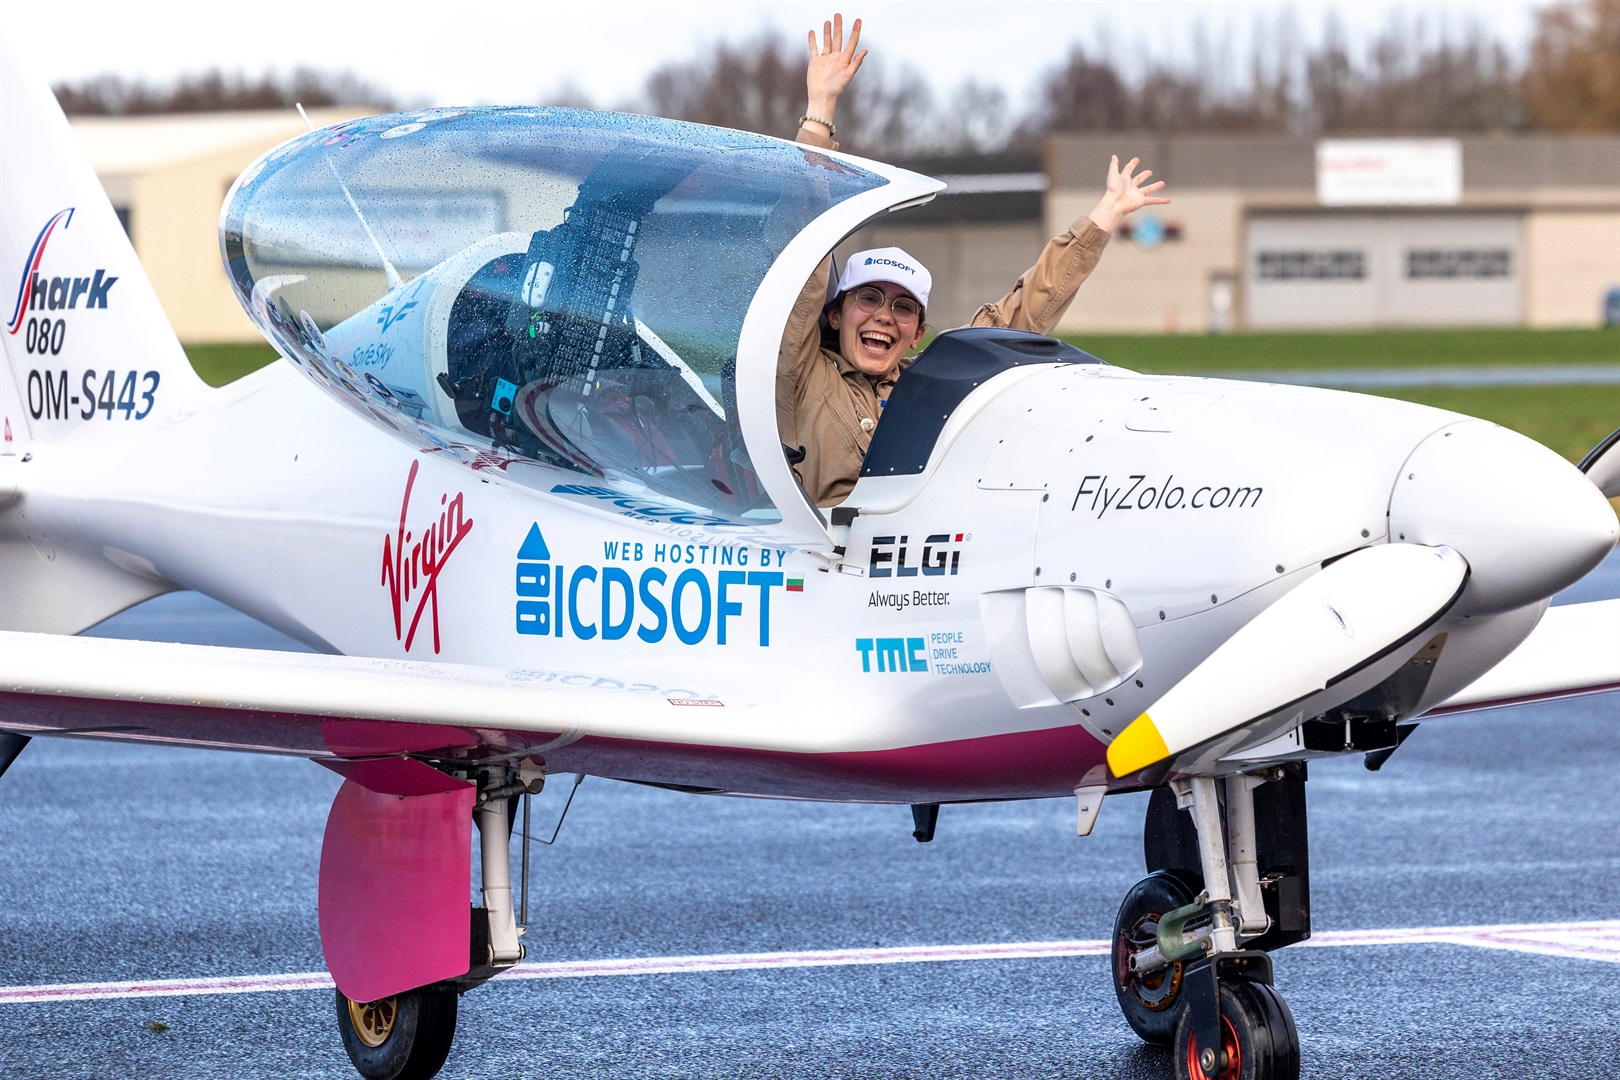 Zara Rutherford lands in Wevelgem airport in Belgium on January 20 after flying solo around the world.